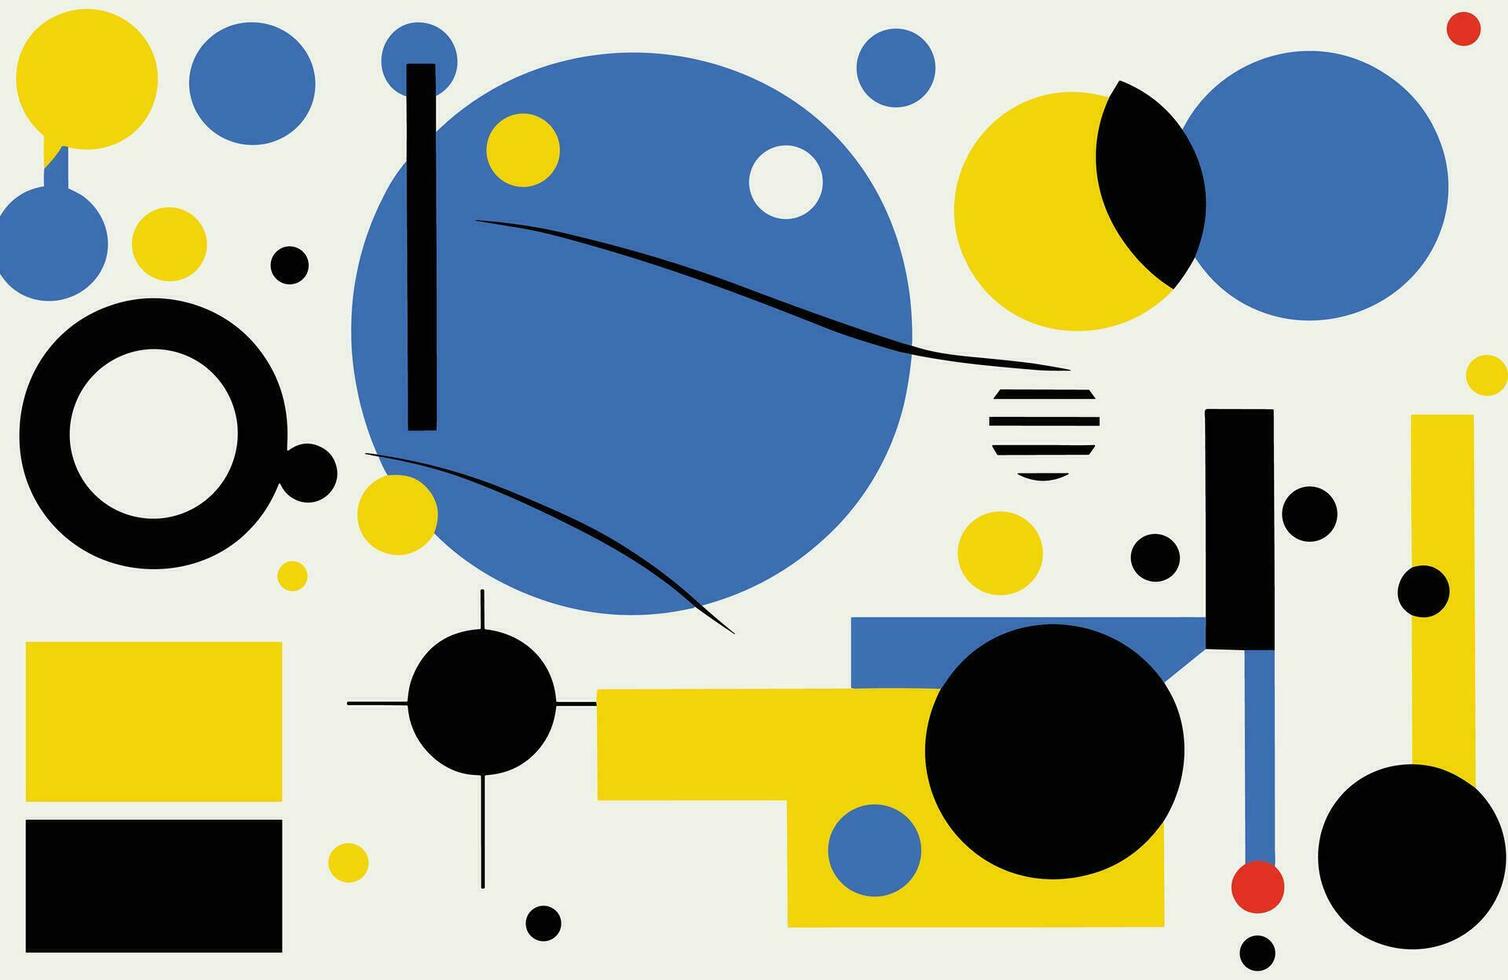 black and white painting contains an abstract design with blue and yellow circles, in the style of de stijl, simple, colorful illustrations, colorful animations, Bauhaus inspired designs vector